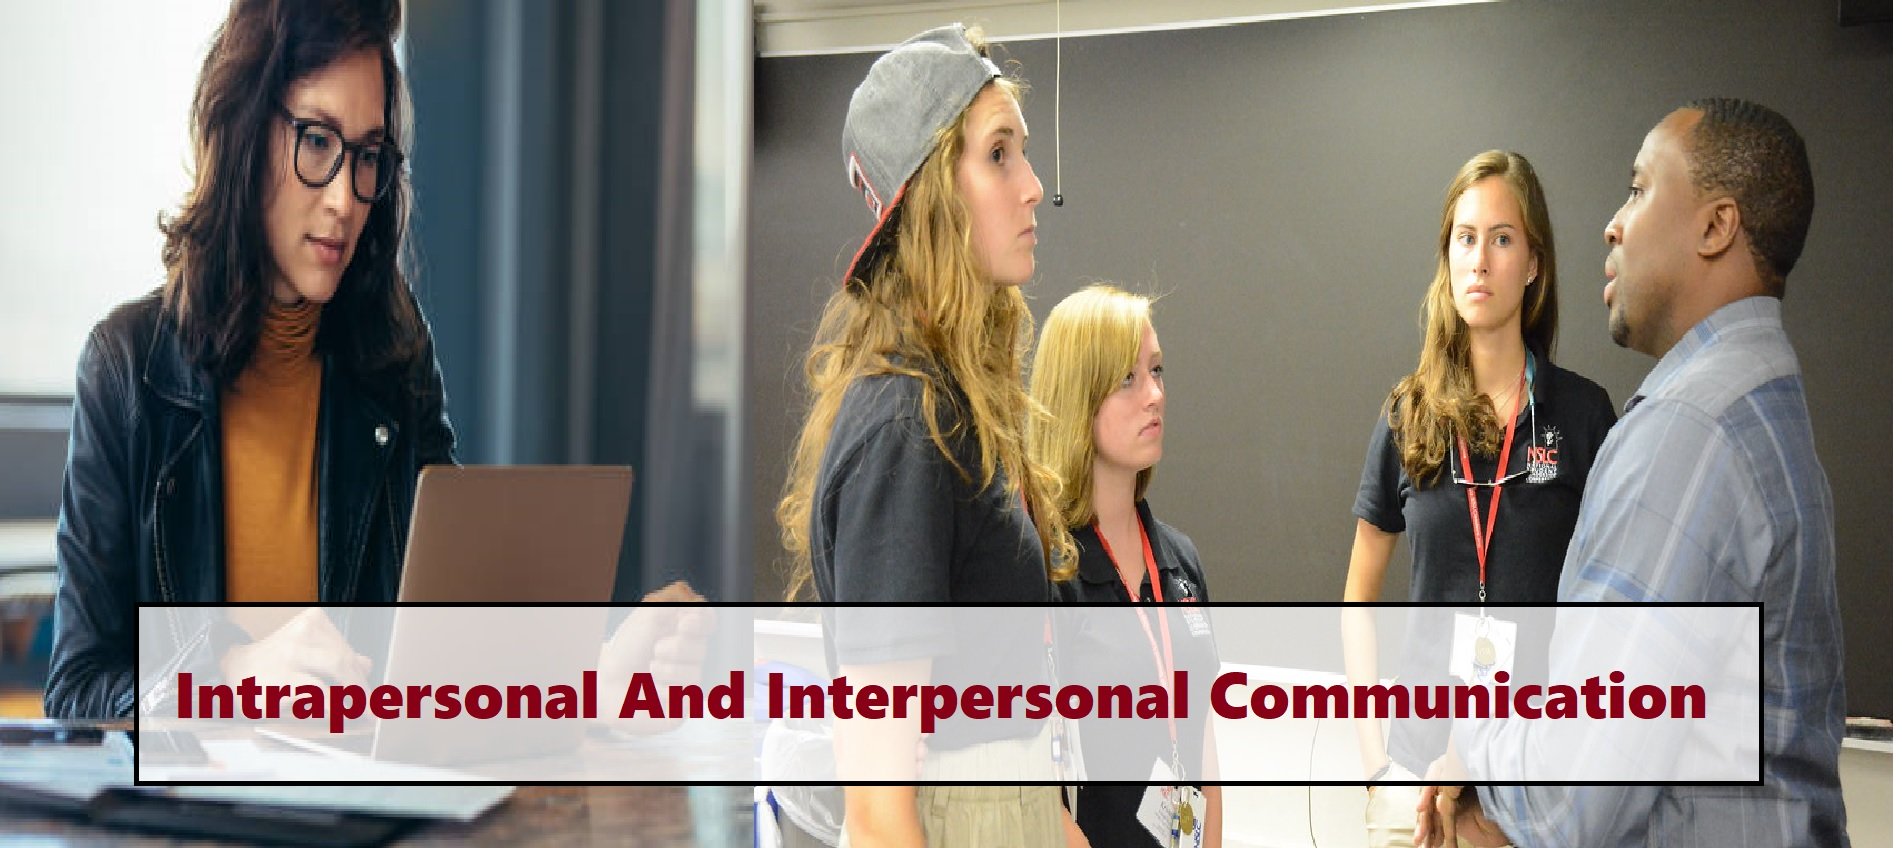 Intrapersonal And Interpersonal Communication